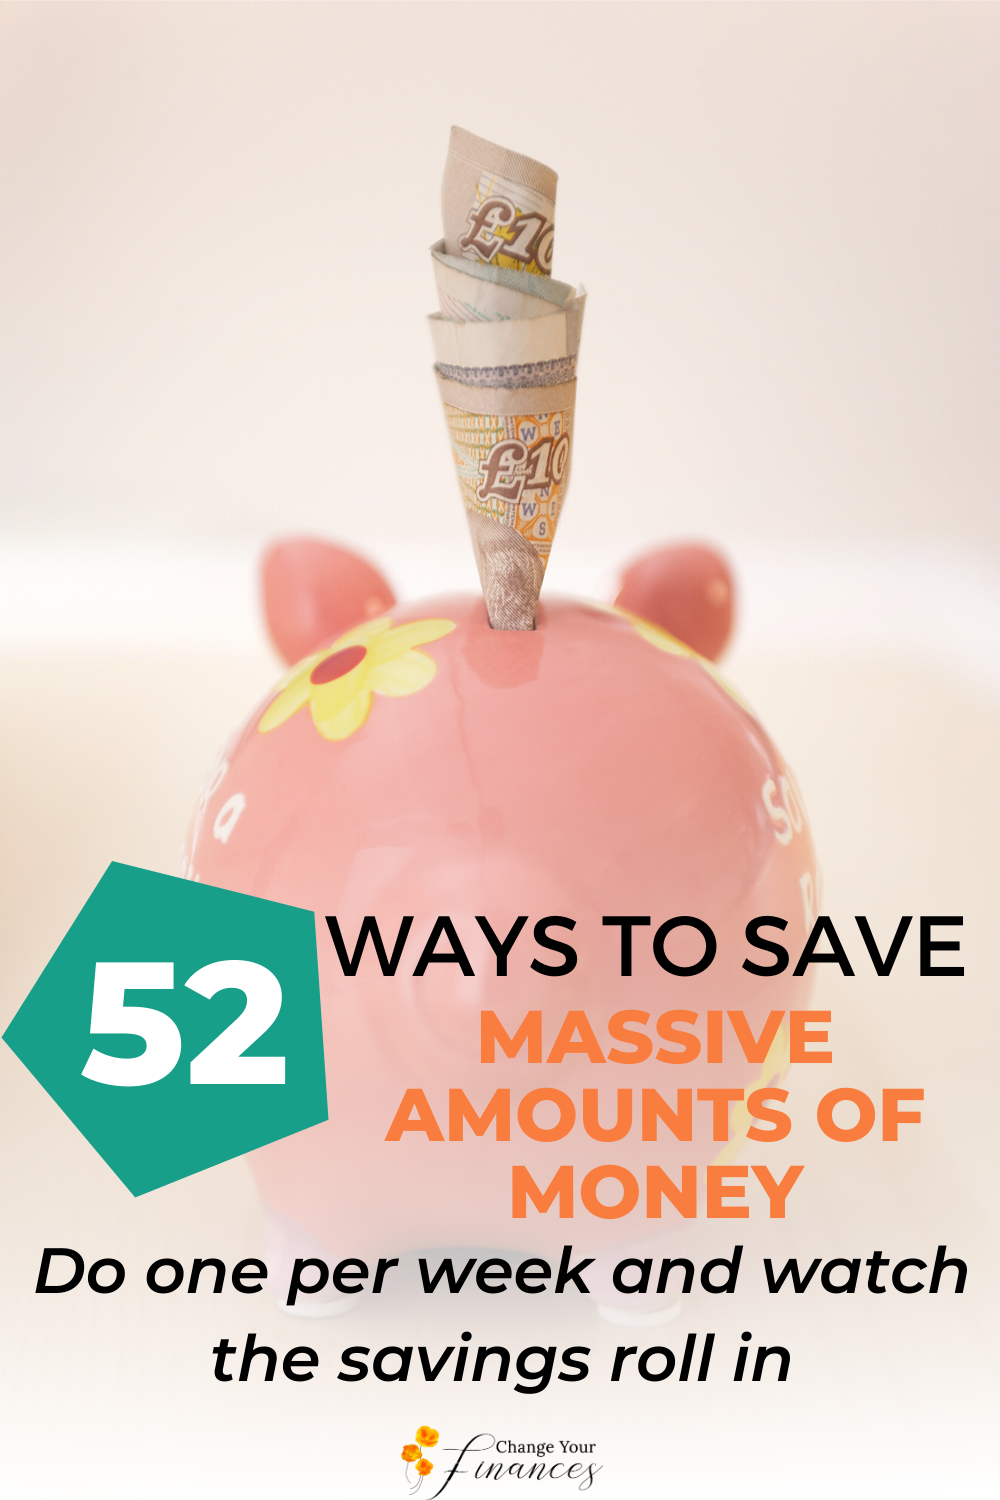 52 Simple tips to greatly reduce your monthly expenses, boost your savings, and create financial peace. Do one each week and crush your savings goals! #savings #savingmoney #savemoney #freeworksheet #savingsgoals #savingtips #moneytips #moneygoals #personalfinance #finance #budget #payoffdebt |Change Your Finances